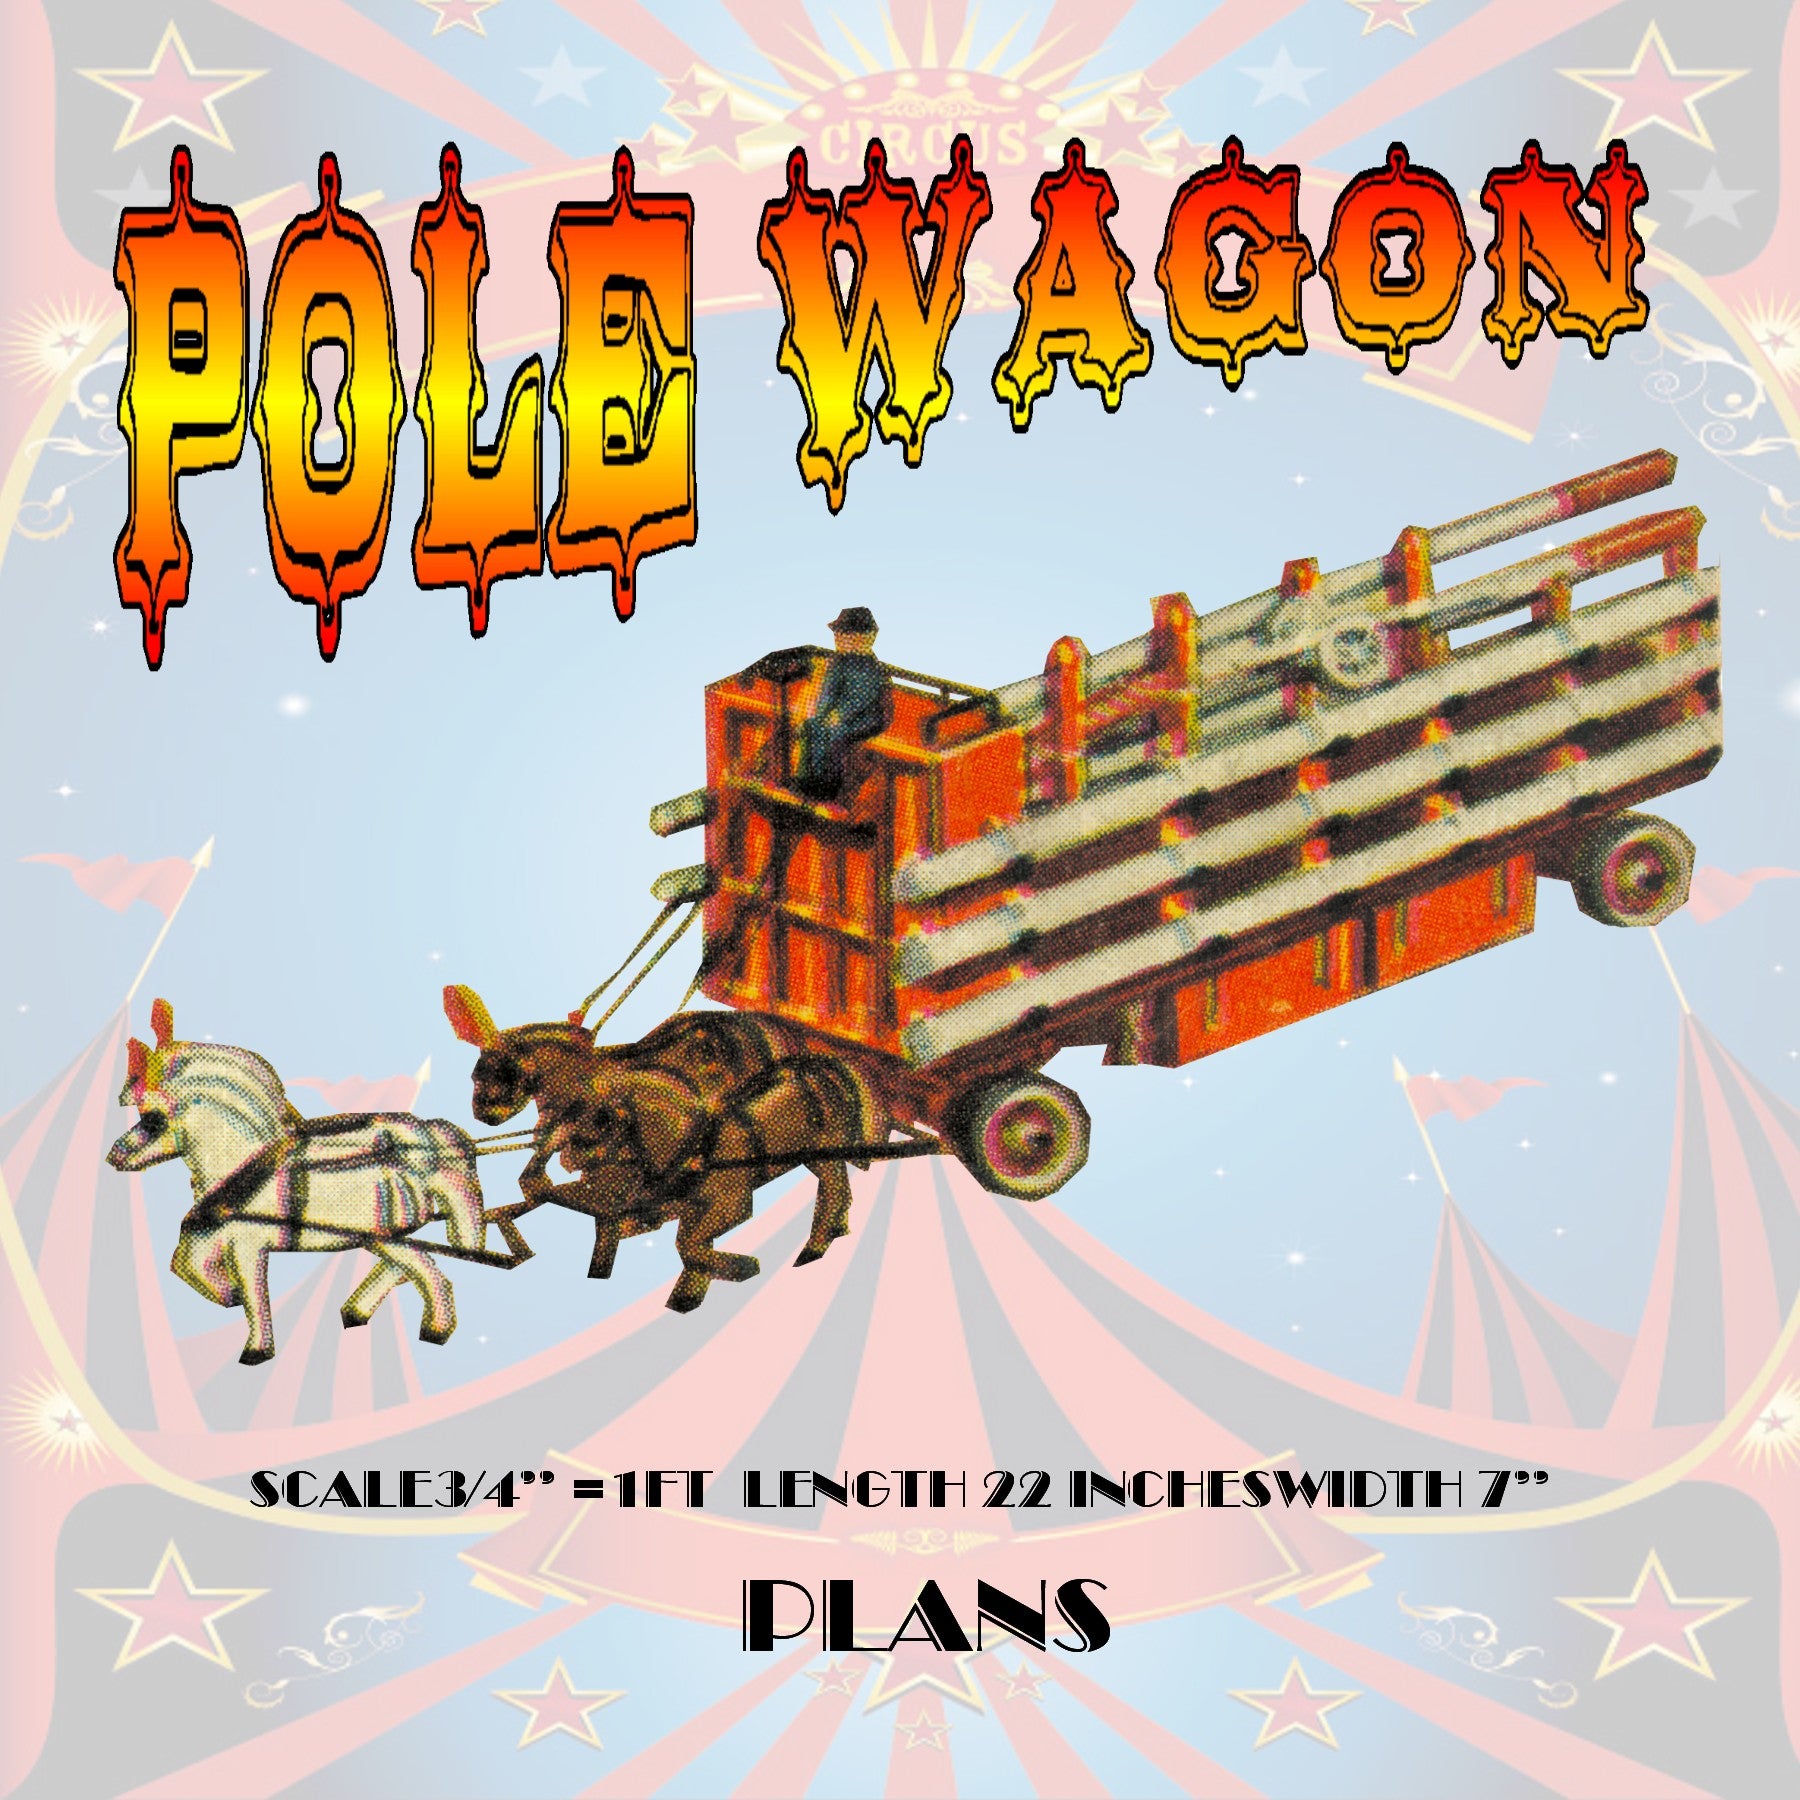 full size printed plans circus pole wagon scale 3/4" =1ft  length 22 inches  width 7 inches  height 12 inches